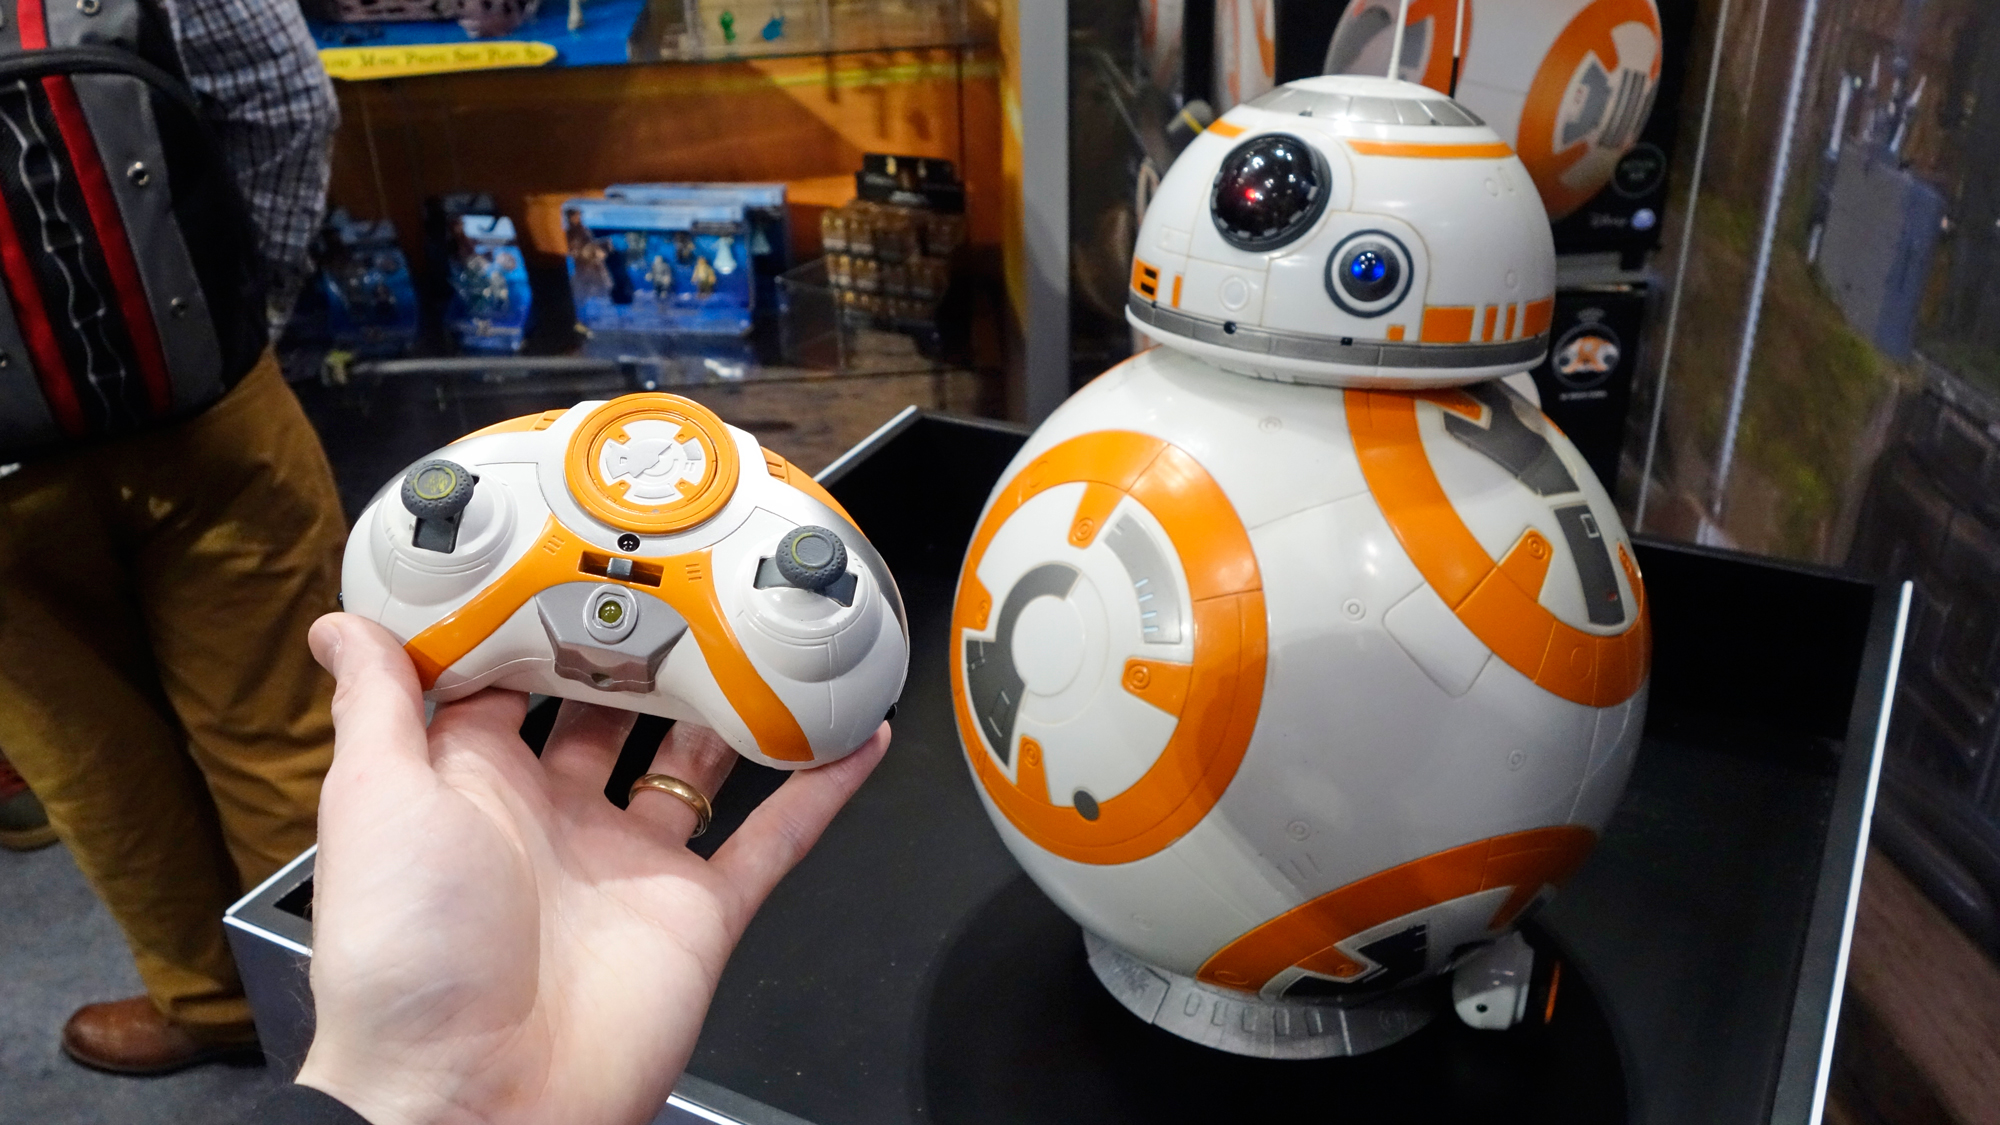 This Giant BB-8 Toy That Follows You Like A Puppy Might Be The Ideal Robotic Pet